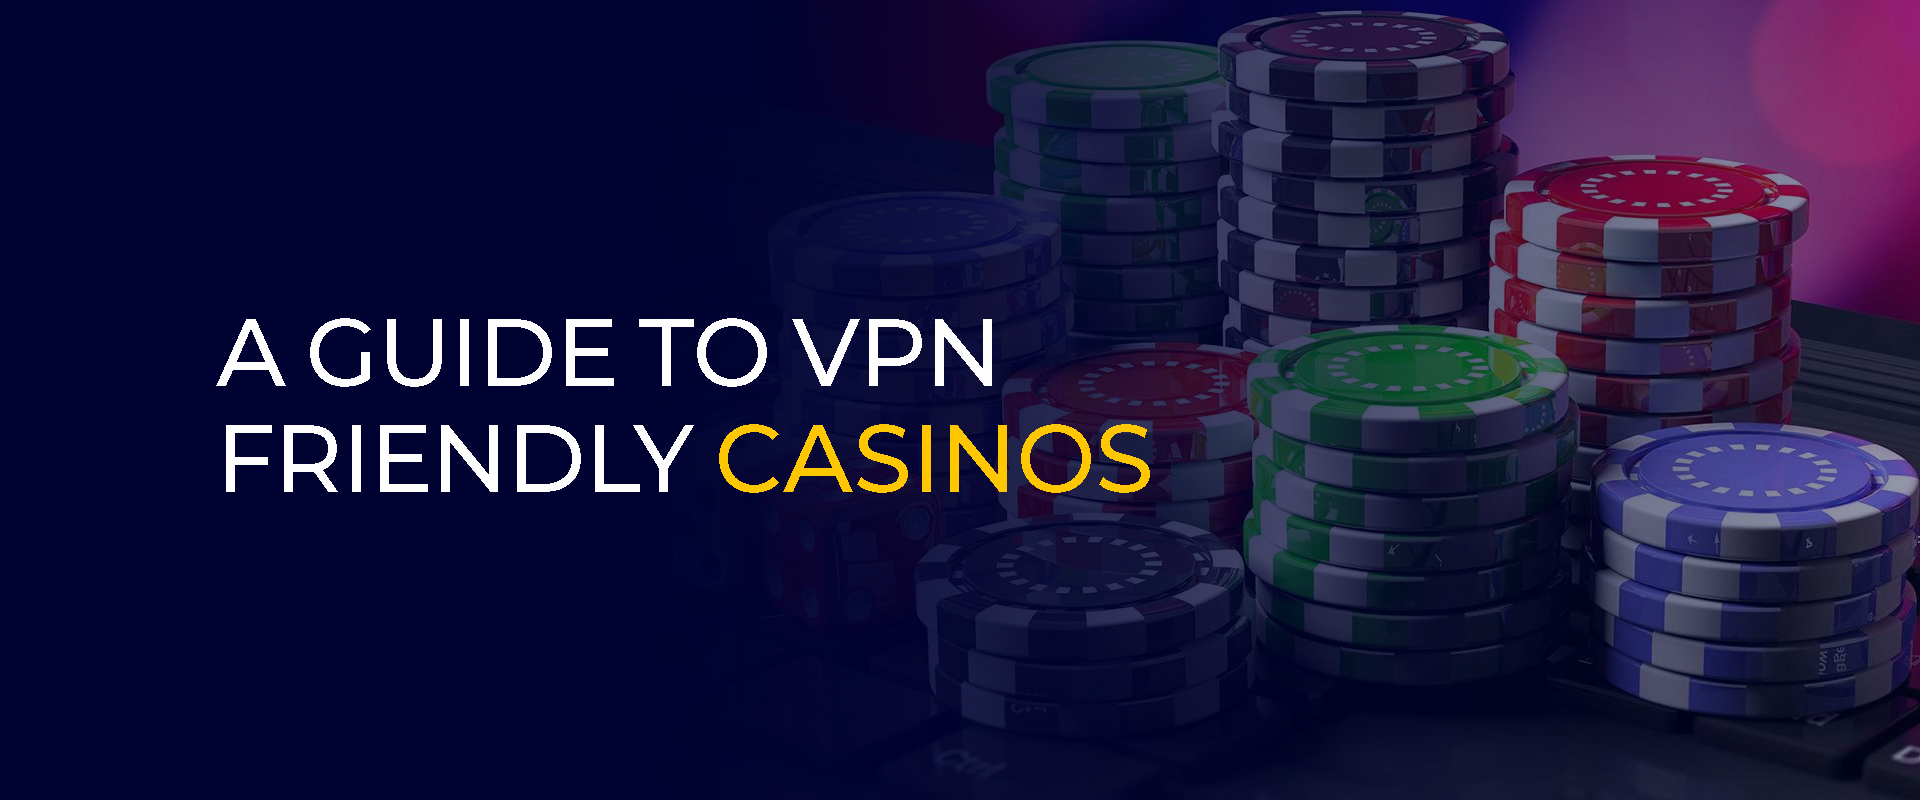 Guide to VPN Friendly Casinos